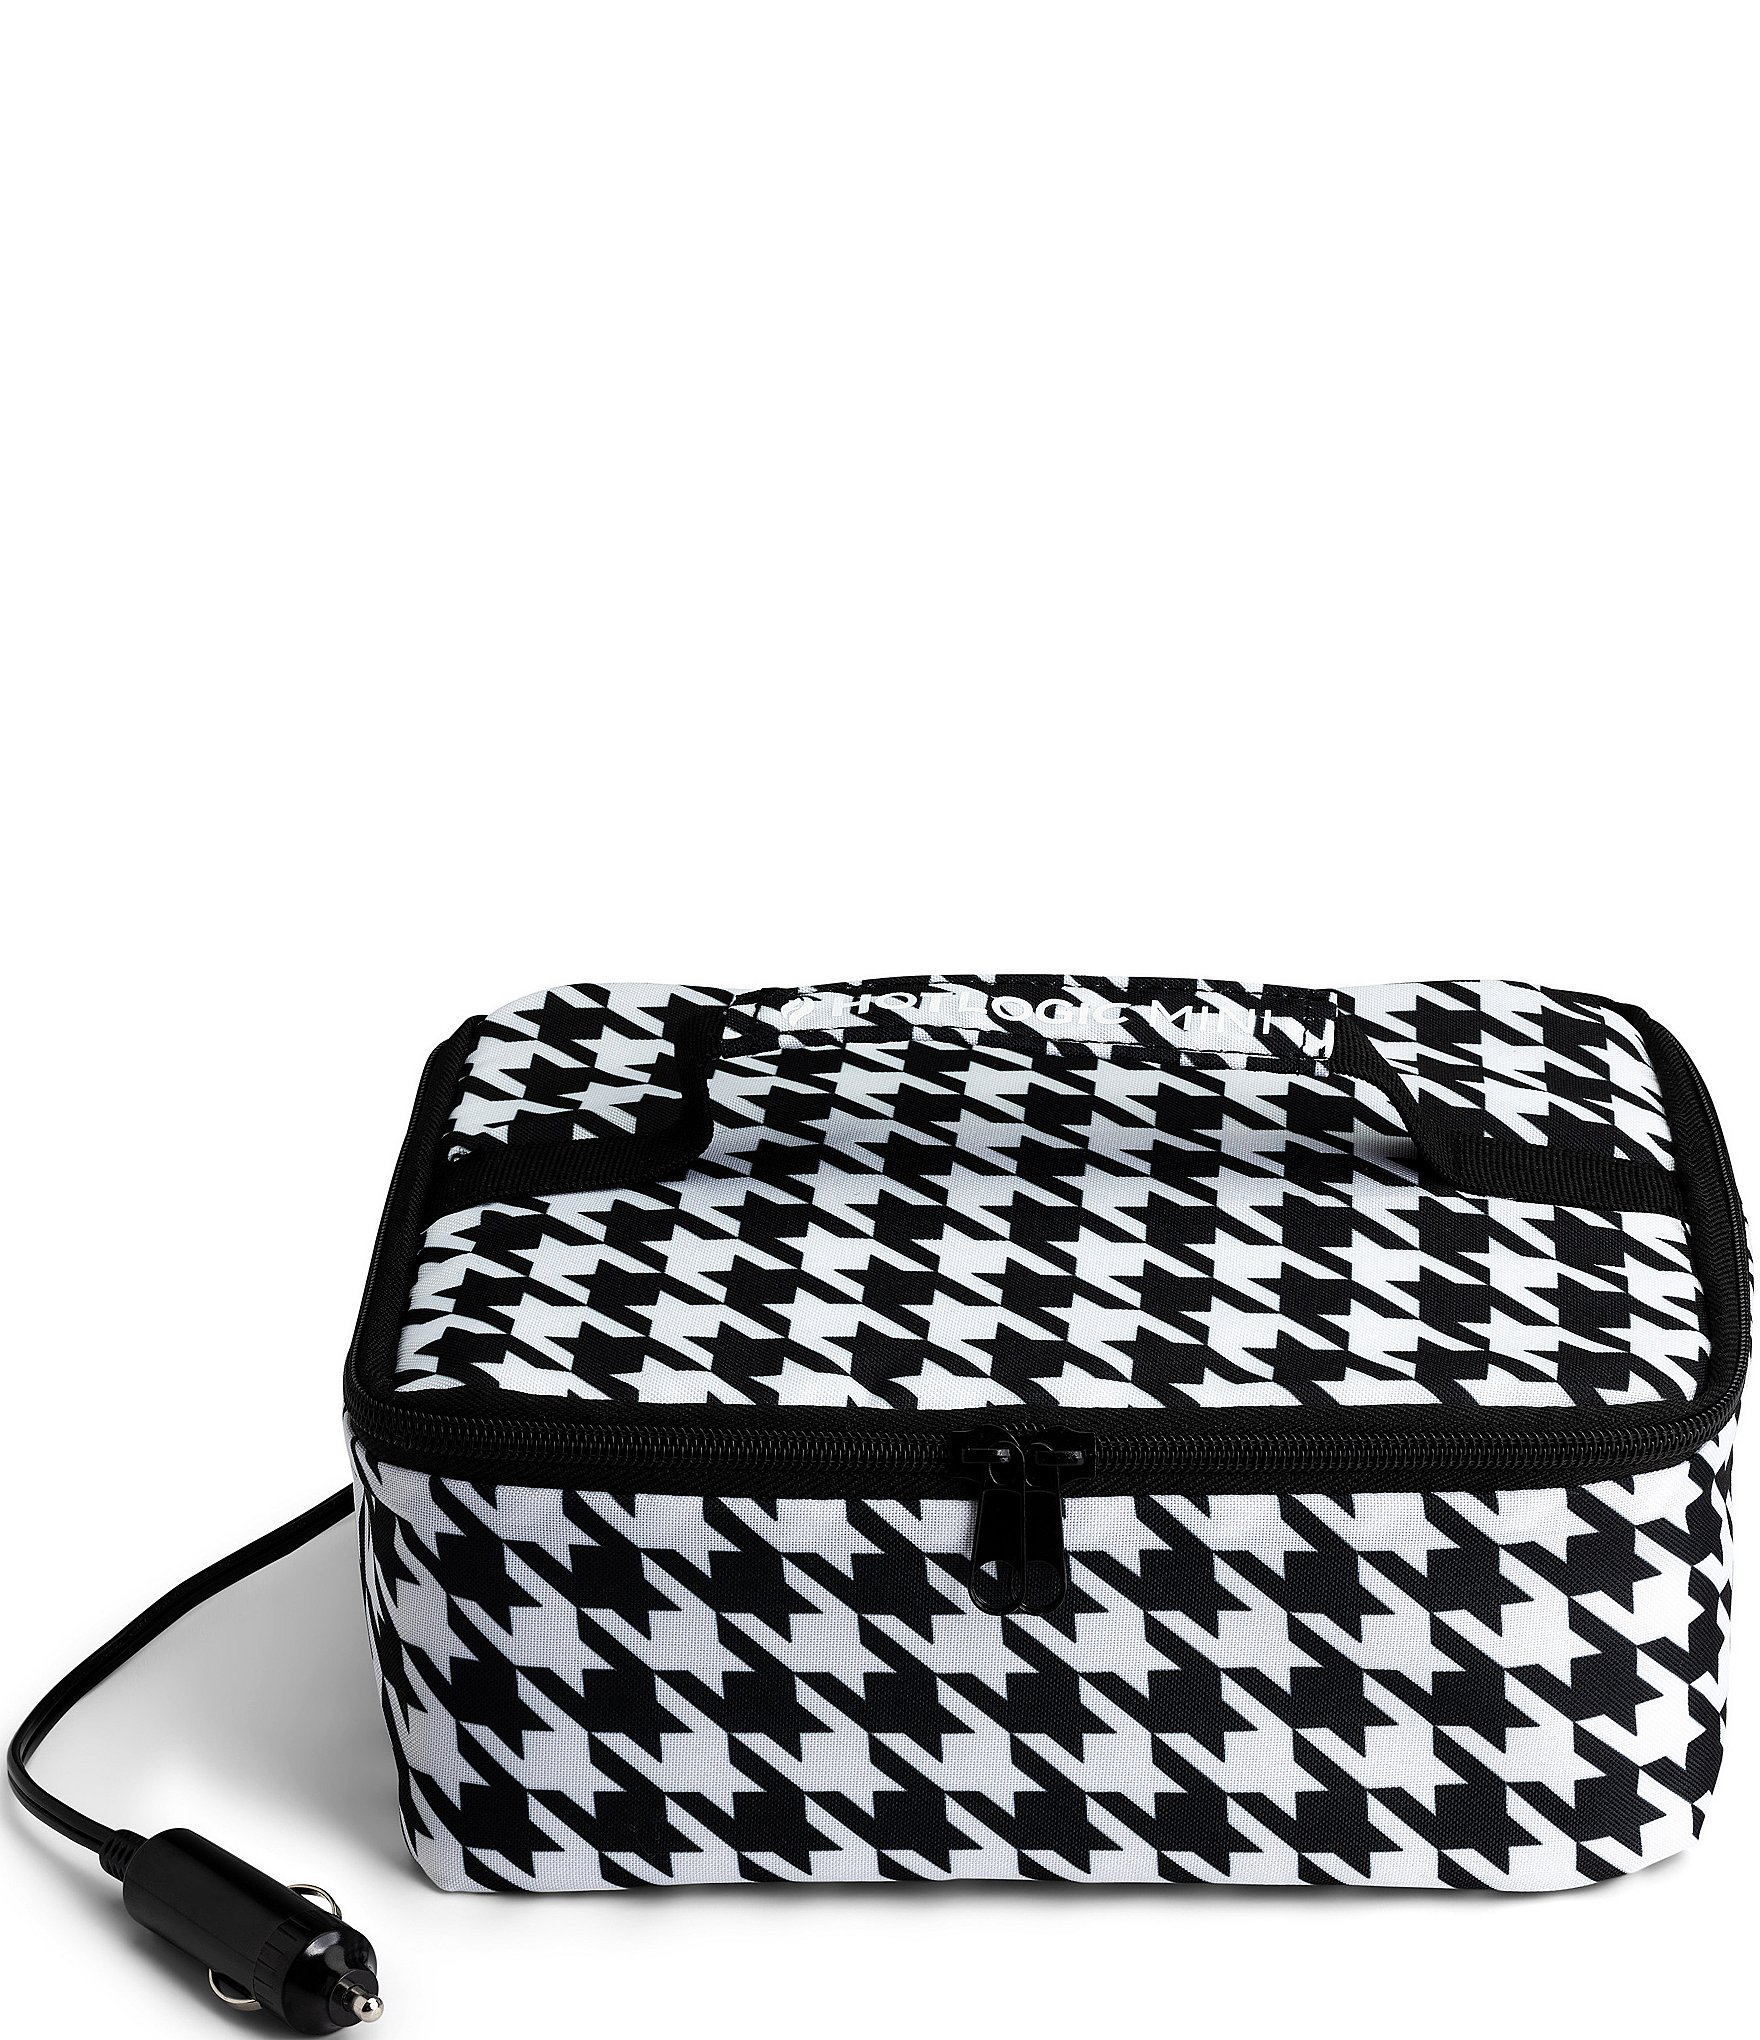 Masonic Freemason Checkered Pattern Insulated Lunch Bags For Women Black  And White Plaid Resuable Thermal Cooler Food Lunch Box